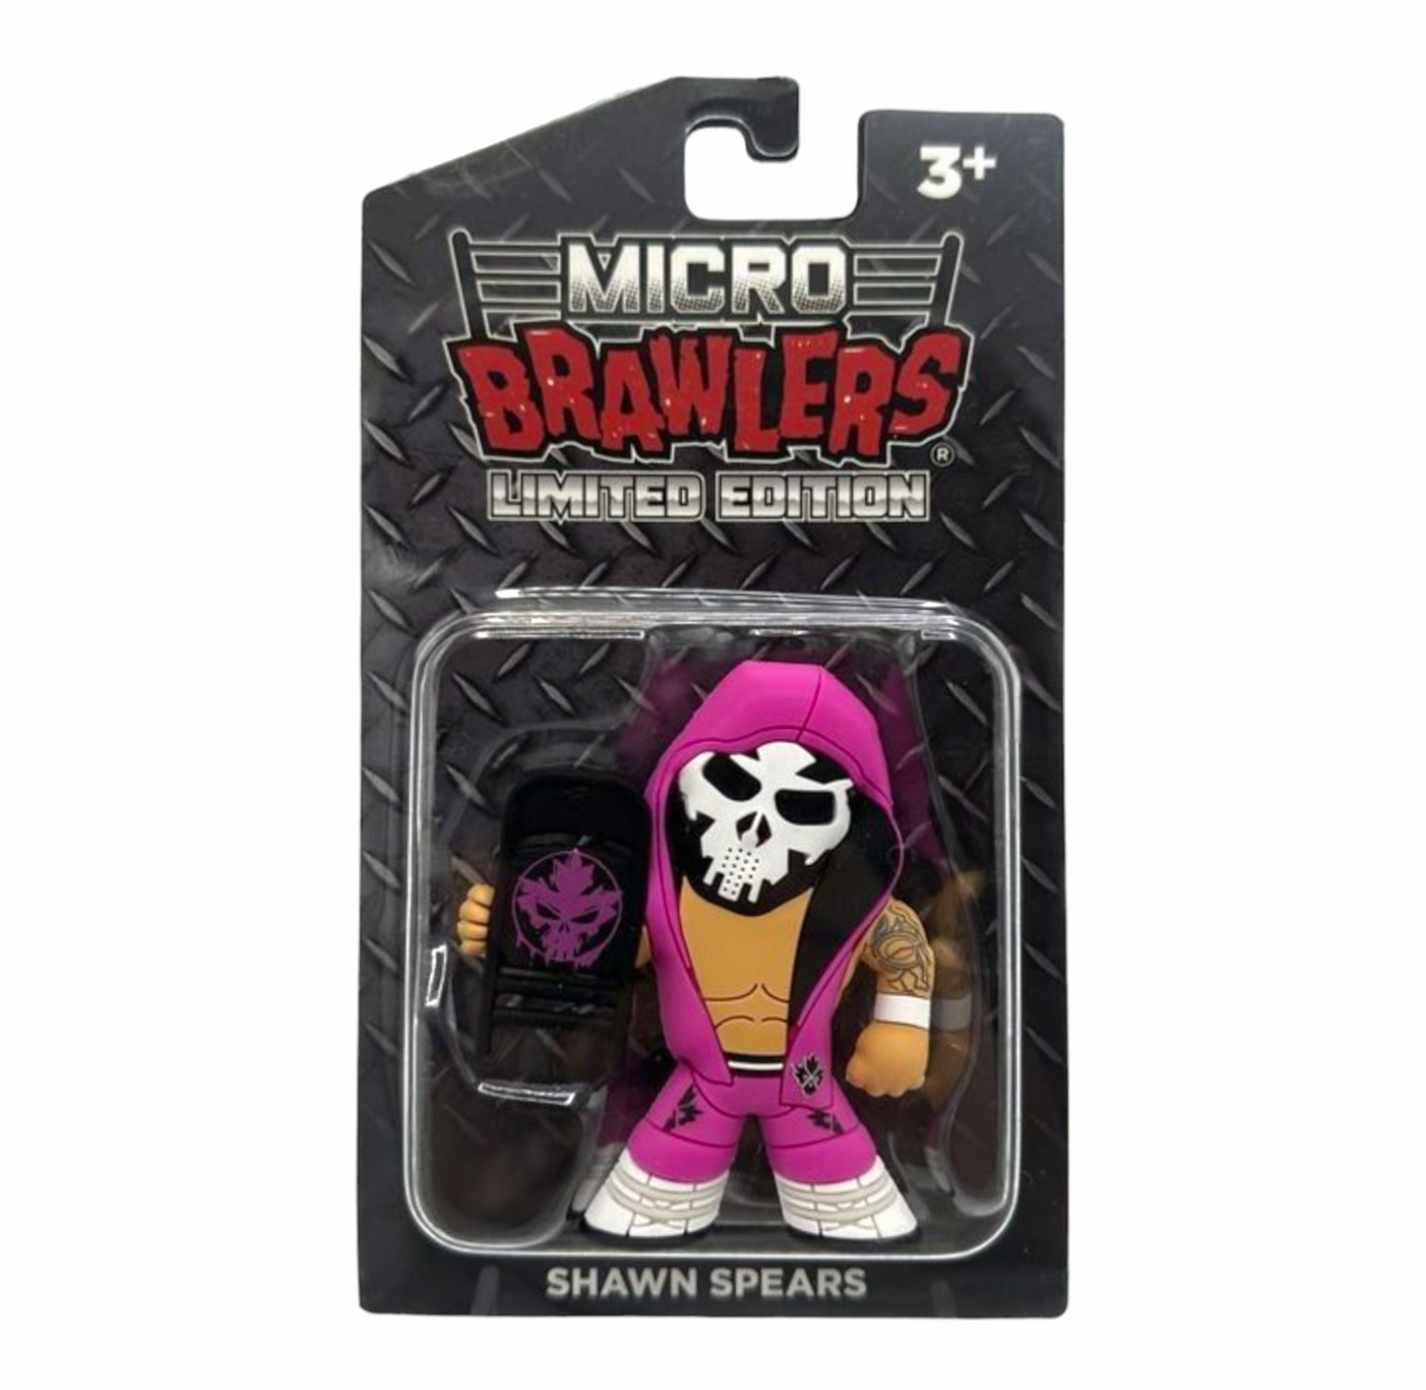 2023 Pro Wrestling Tees Limited Edition Micro Brawler Shawn Spears